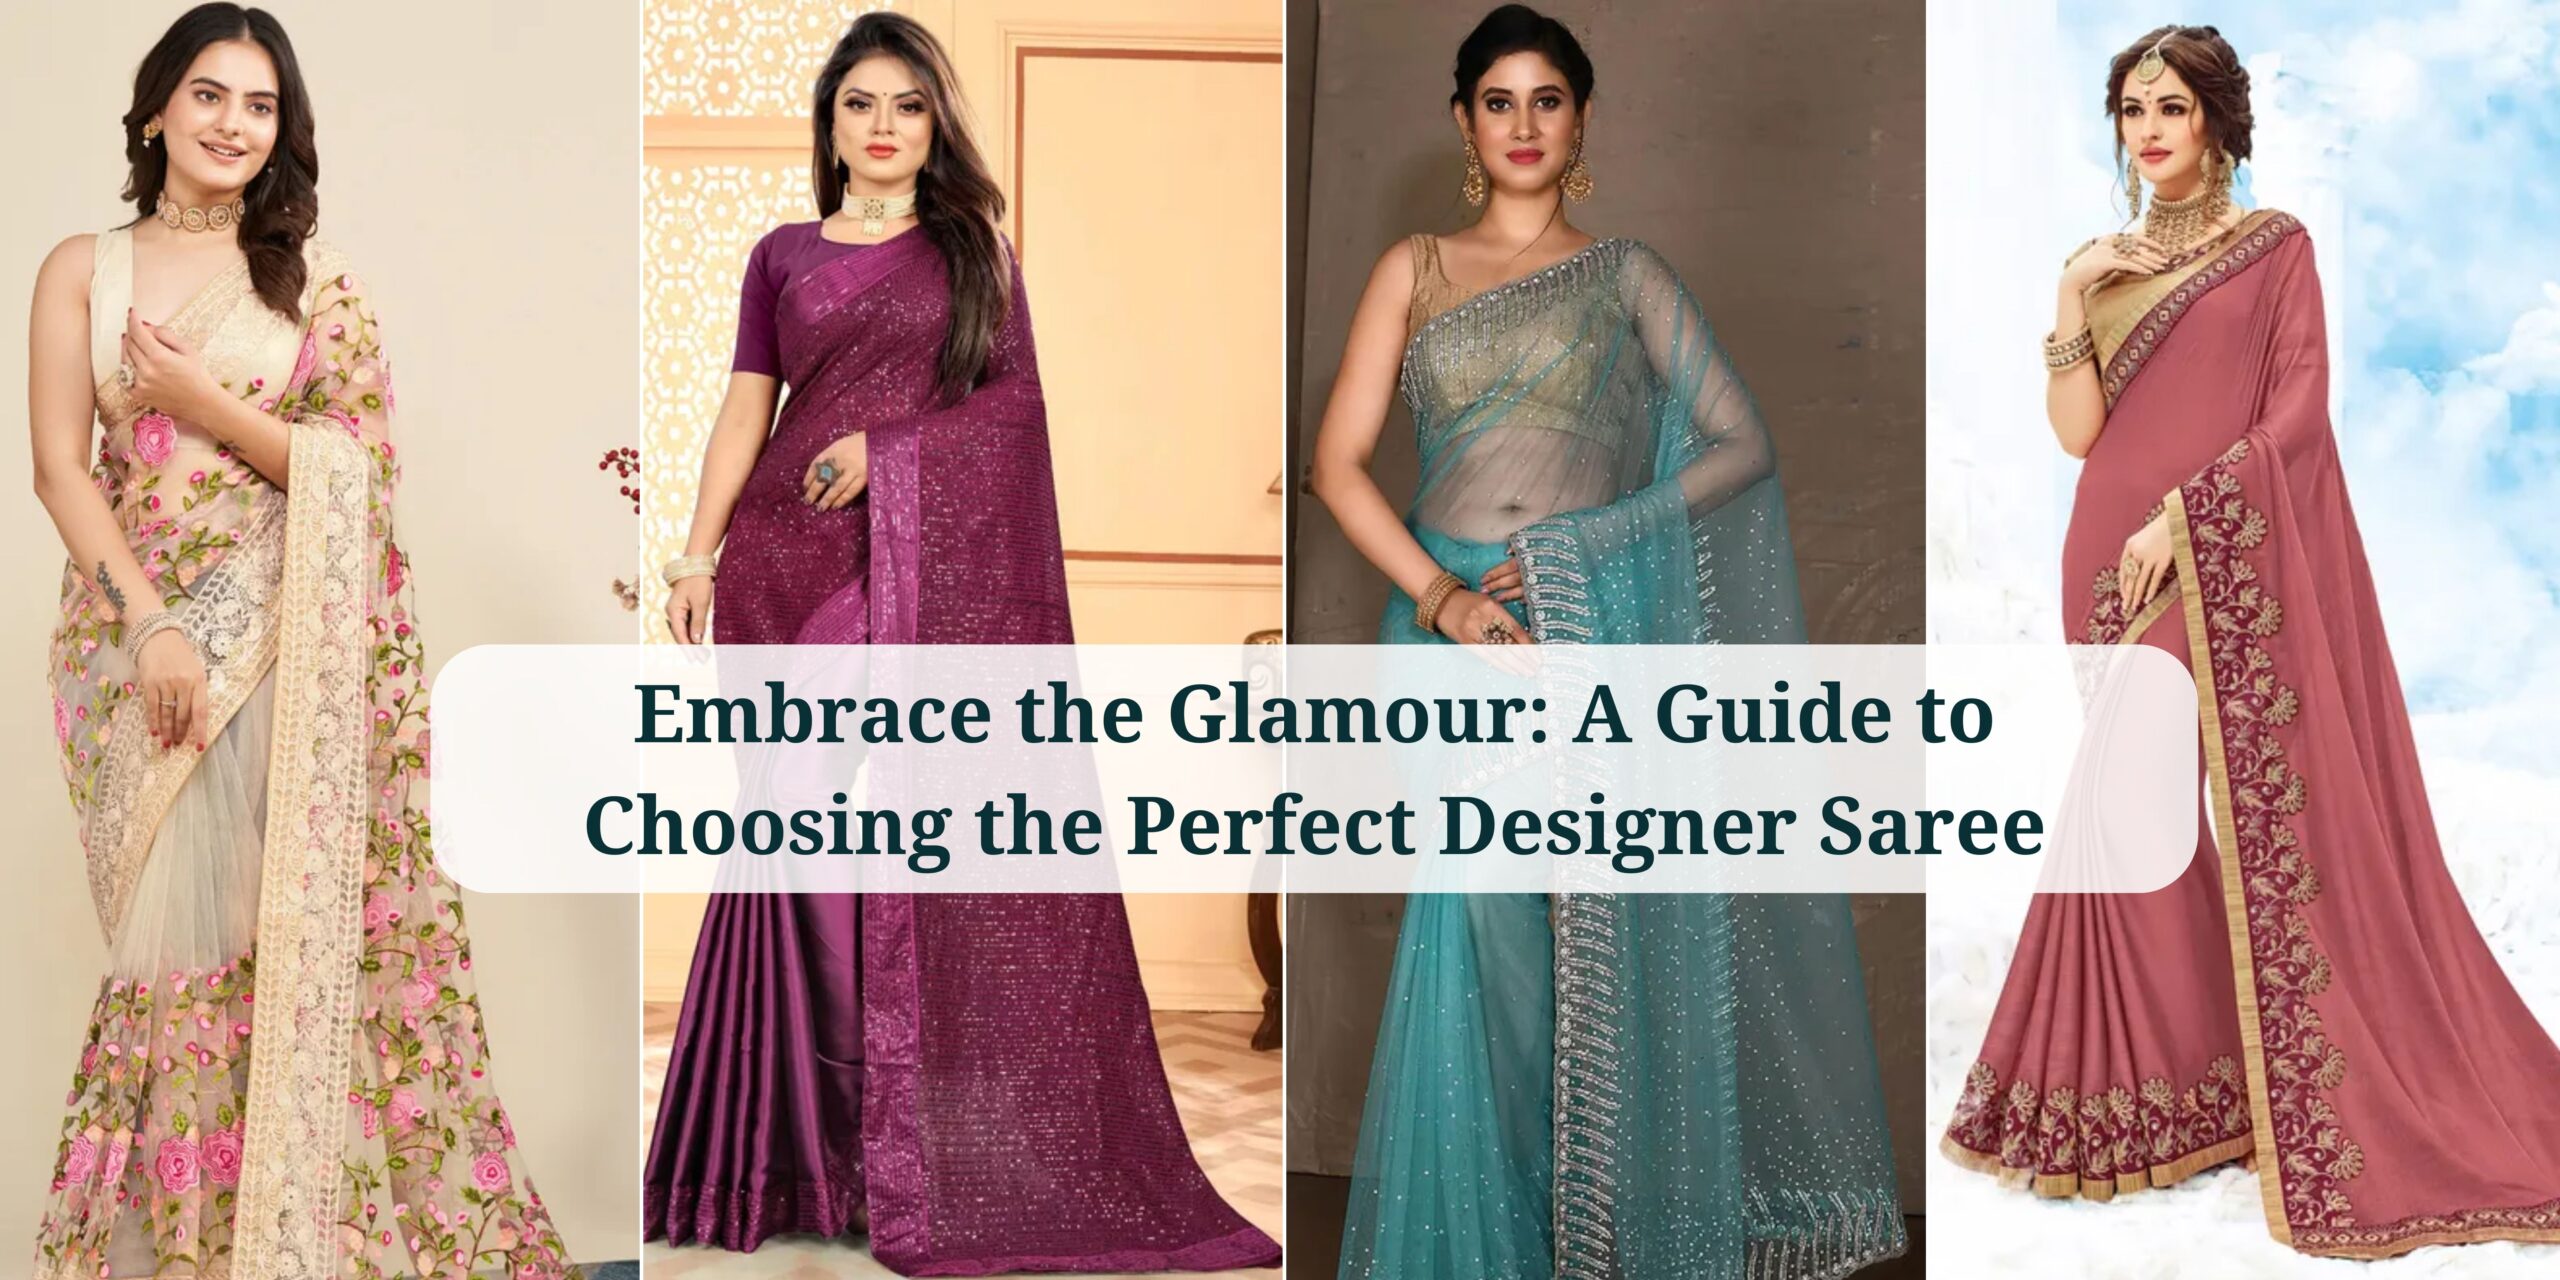 Embrace the Glamour: A Guide to Choosing the Perfect Designer Saree